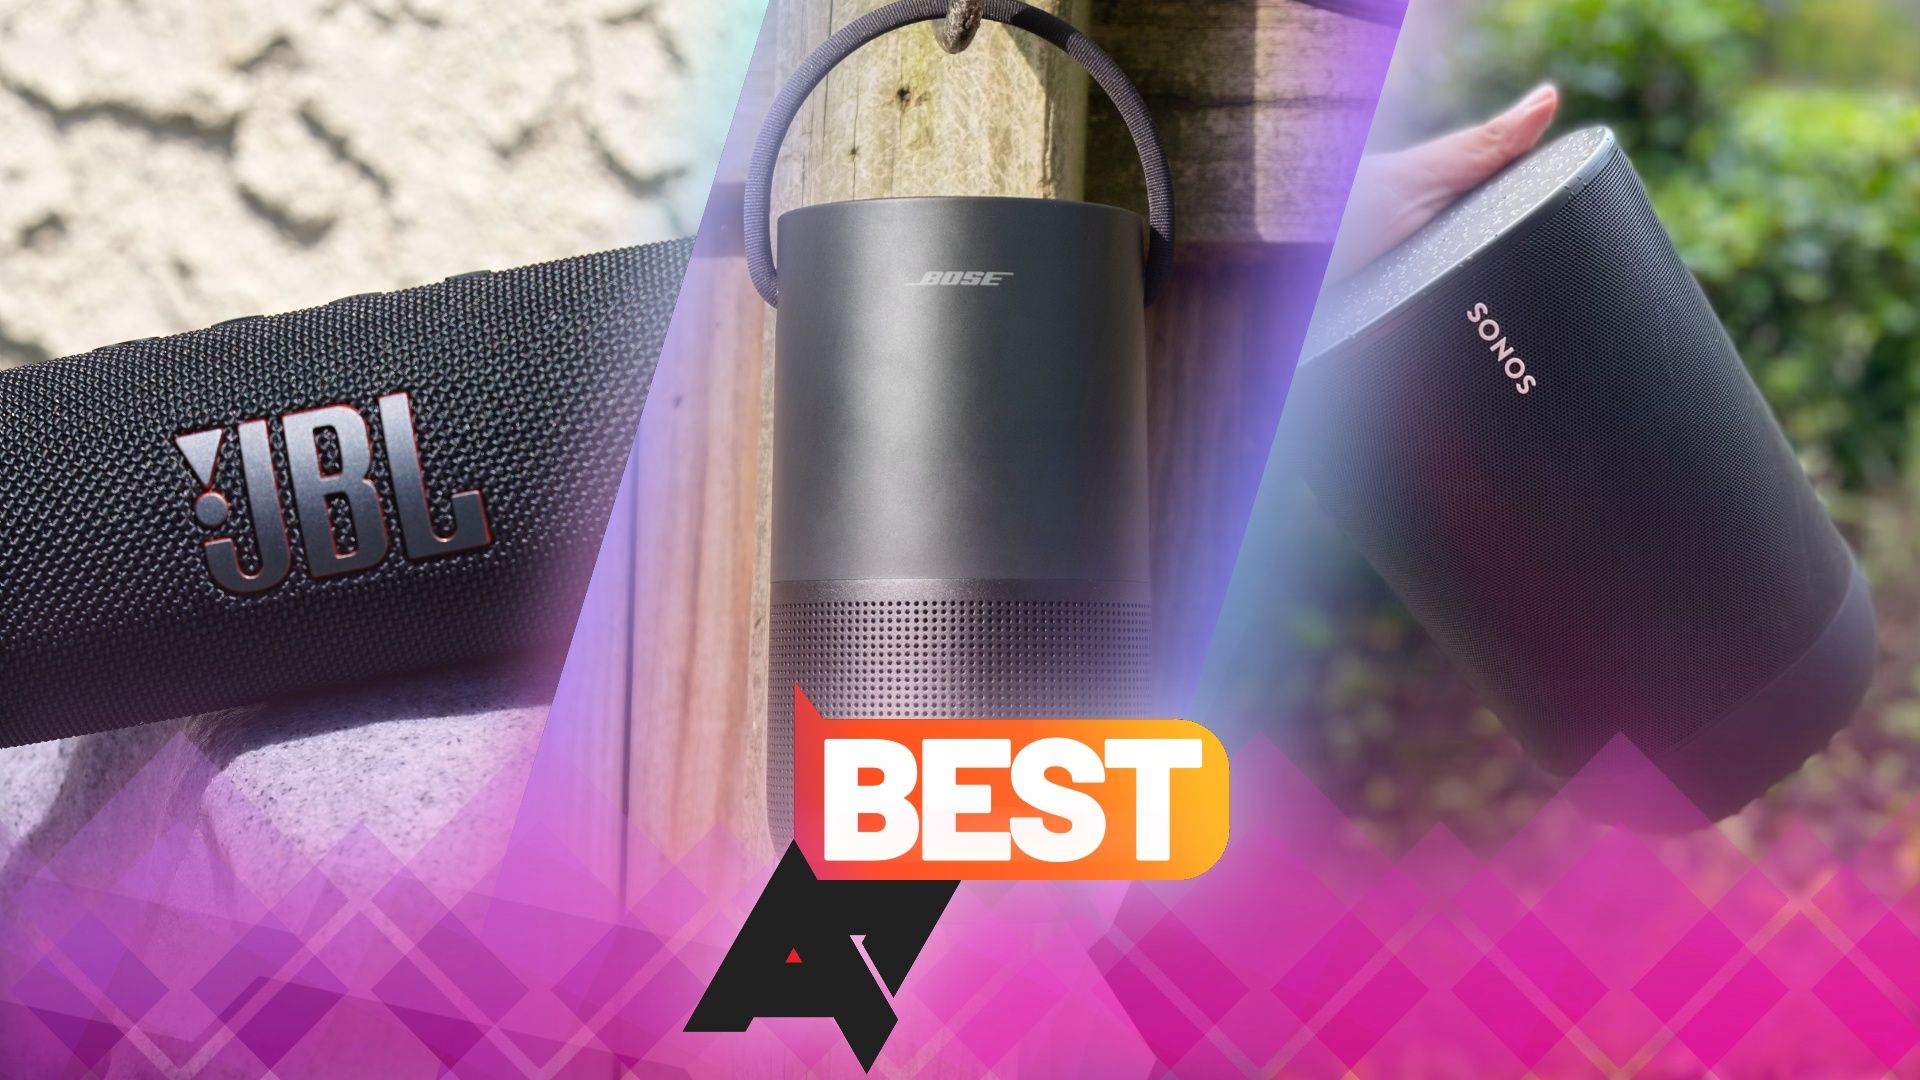 Carry a tune: seven of the best portable Bluetooth speakers, Gadgets